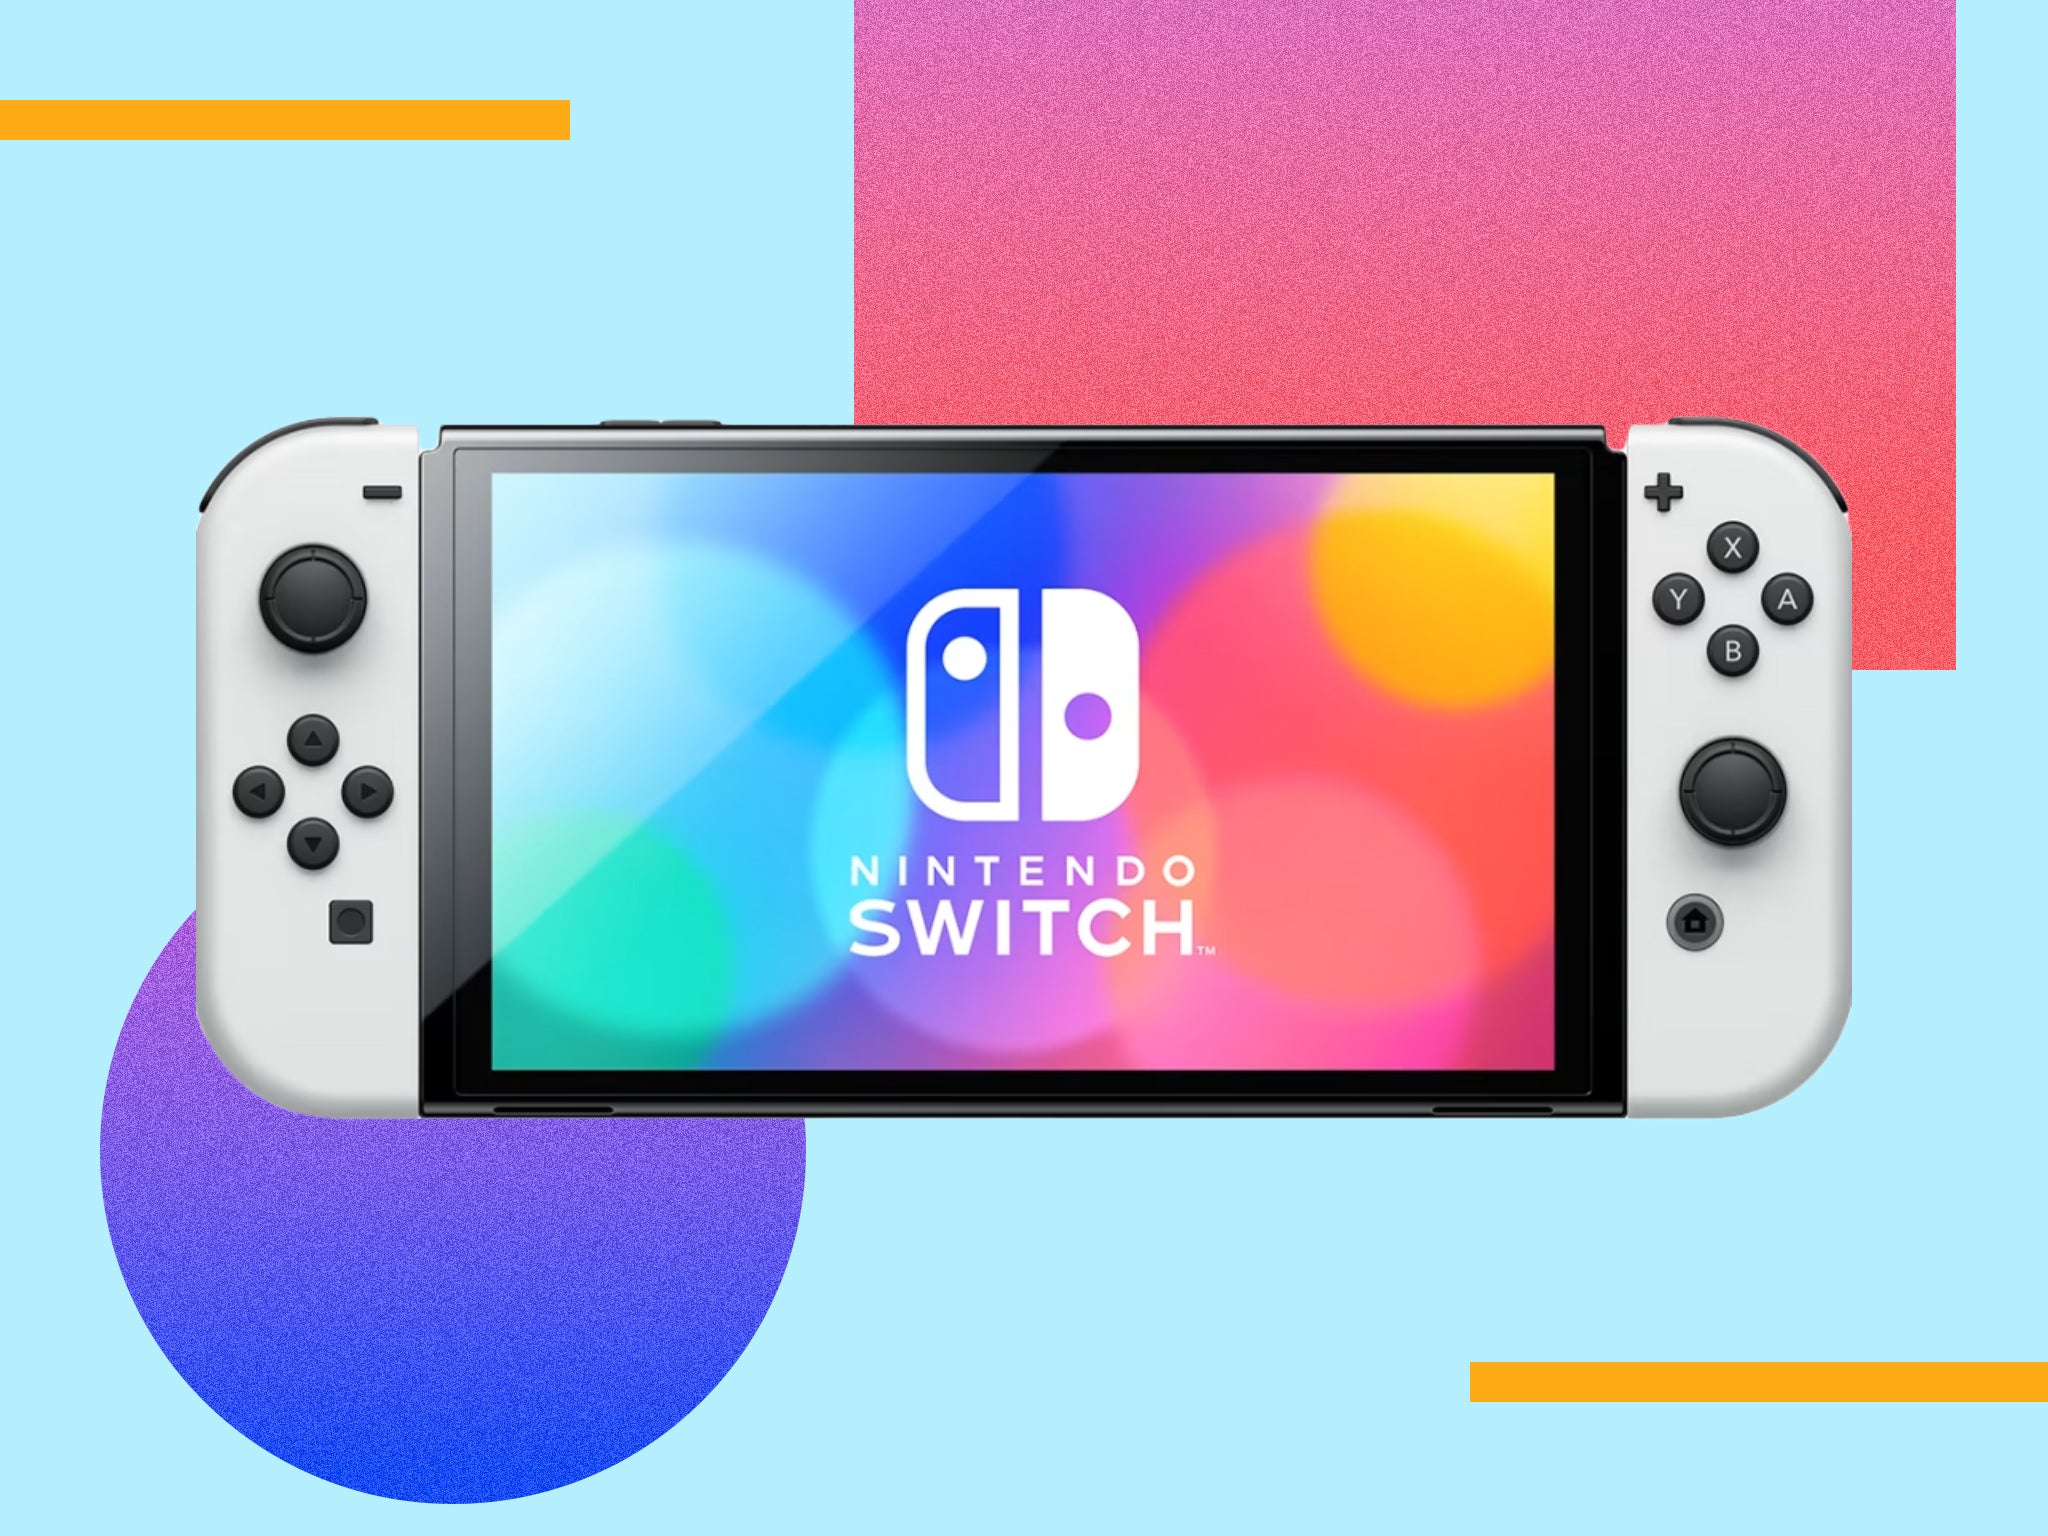 Nintendo Switch OLED deals: Save more than £20 on the latest 